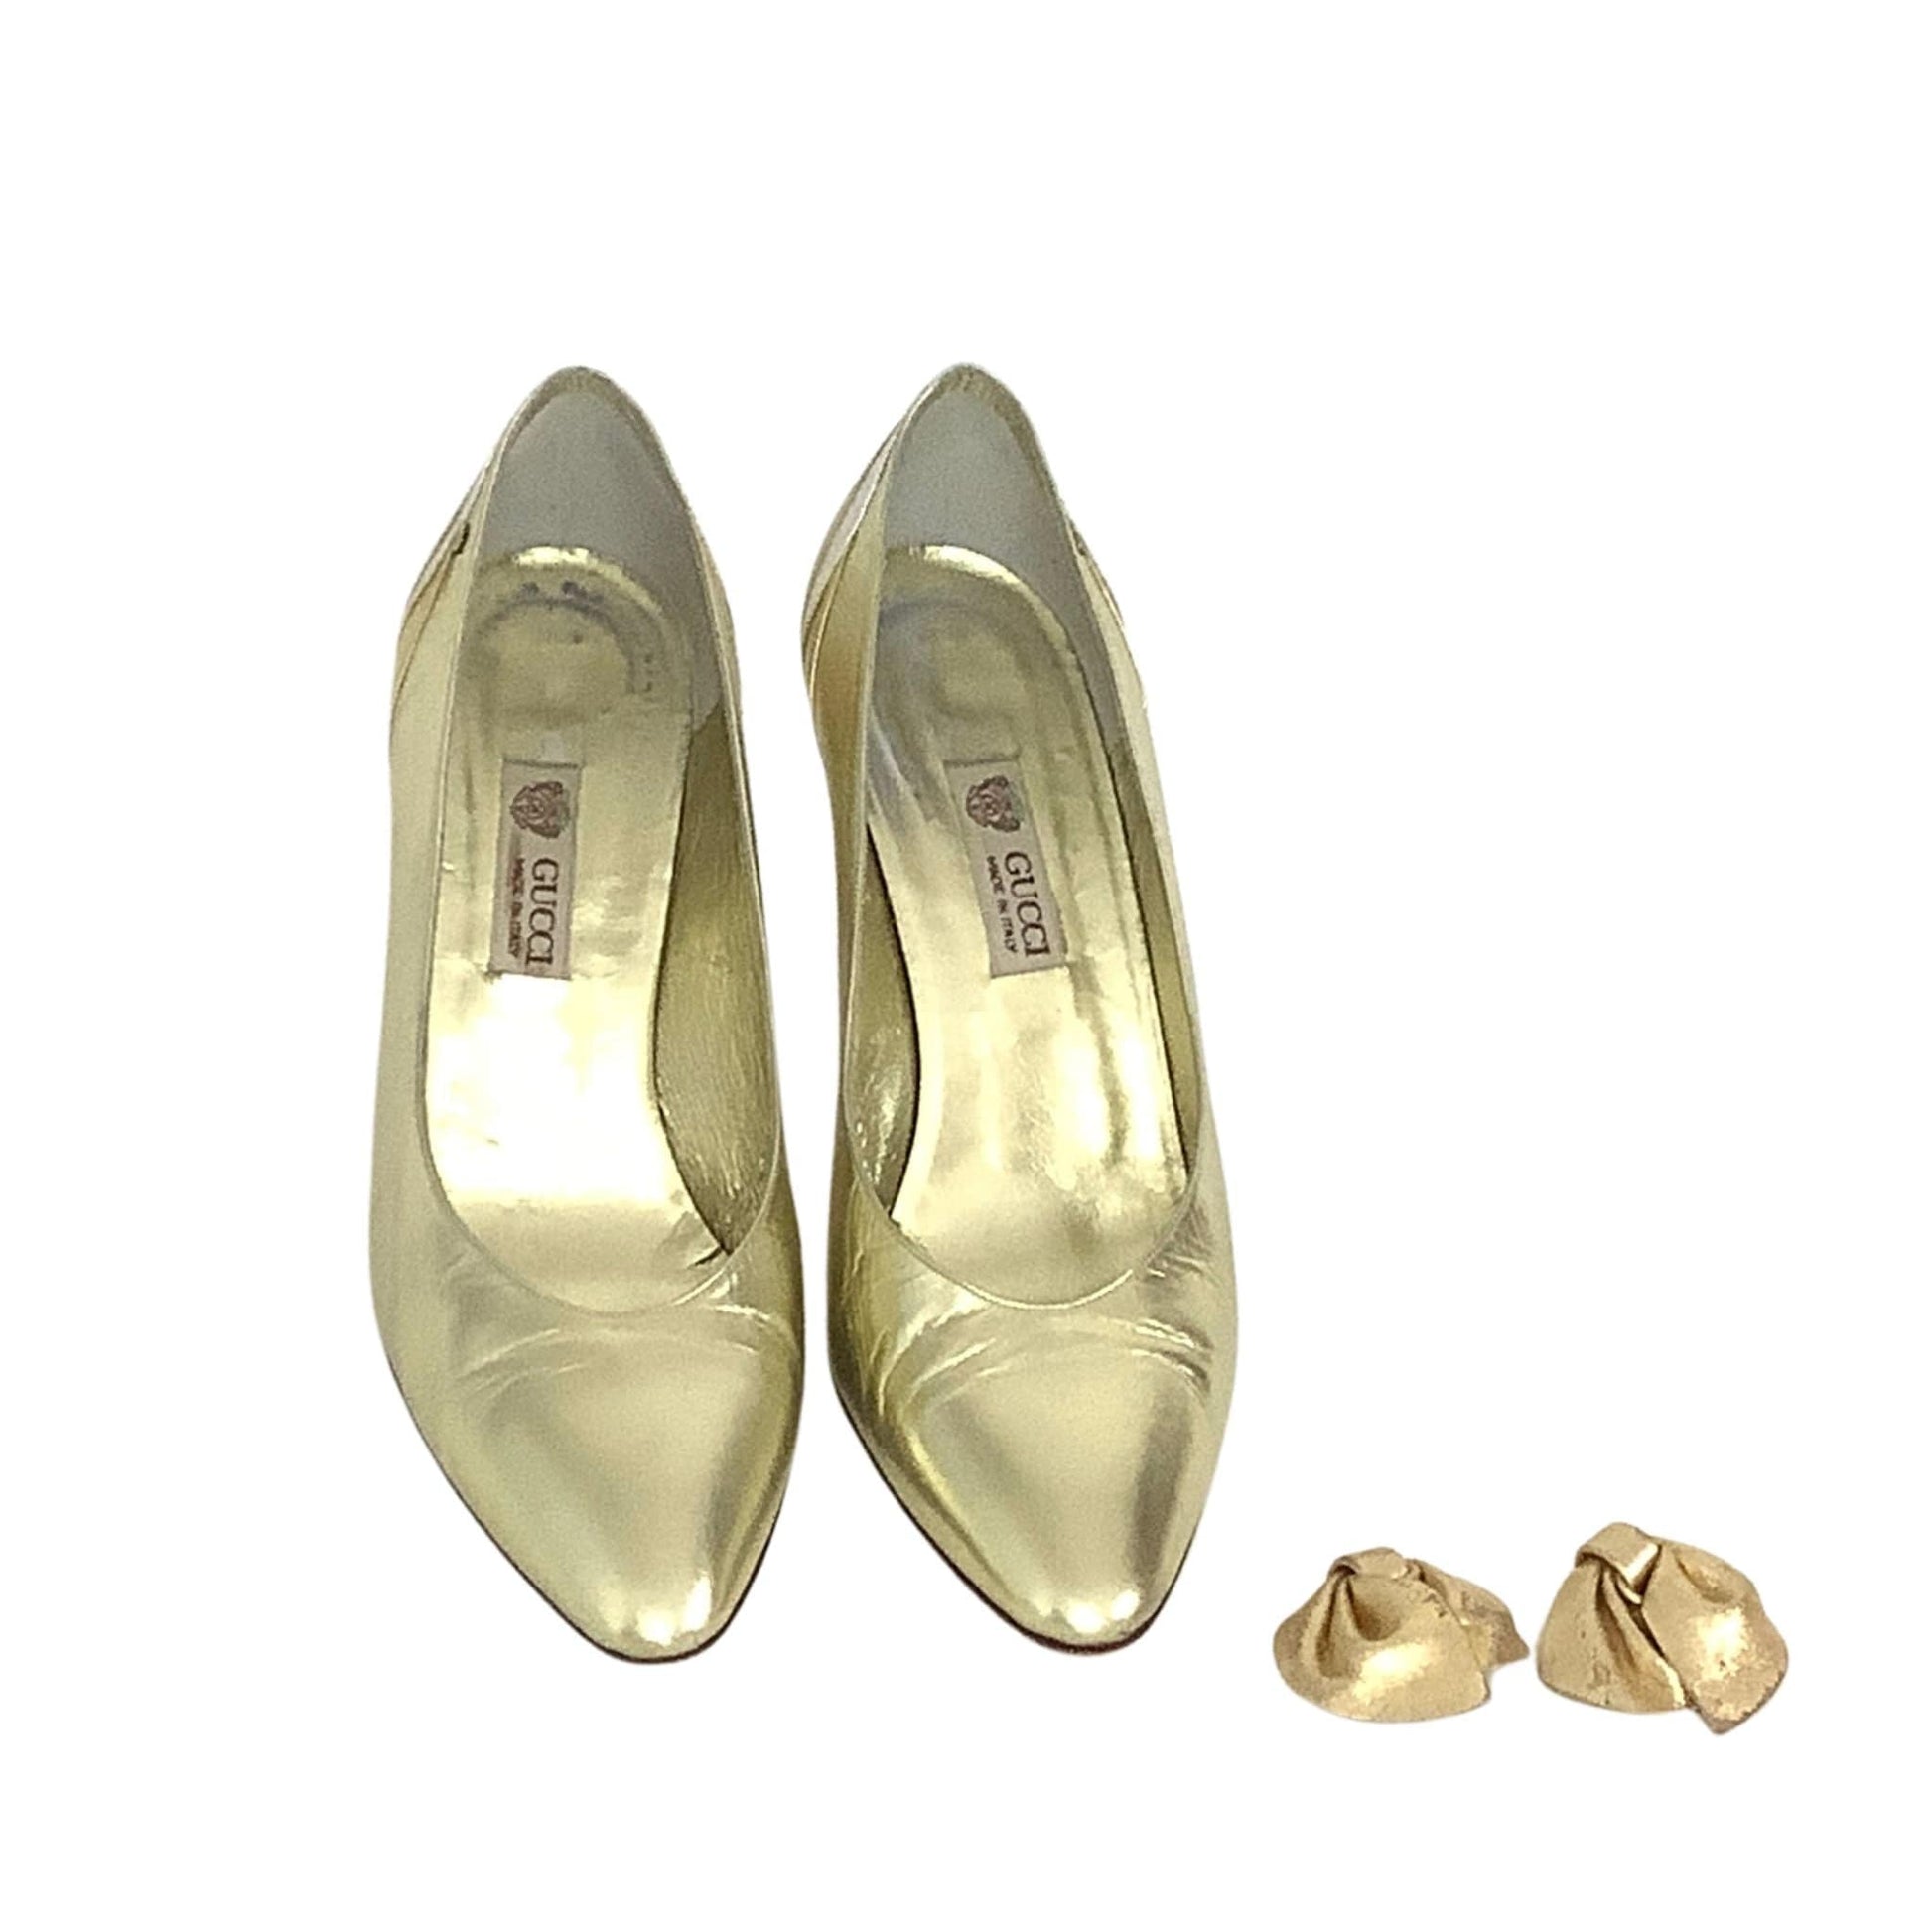 Vintage Gucci Gold Heels 8.5 / Gold / Classic